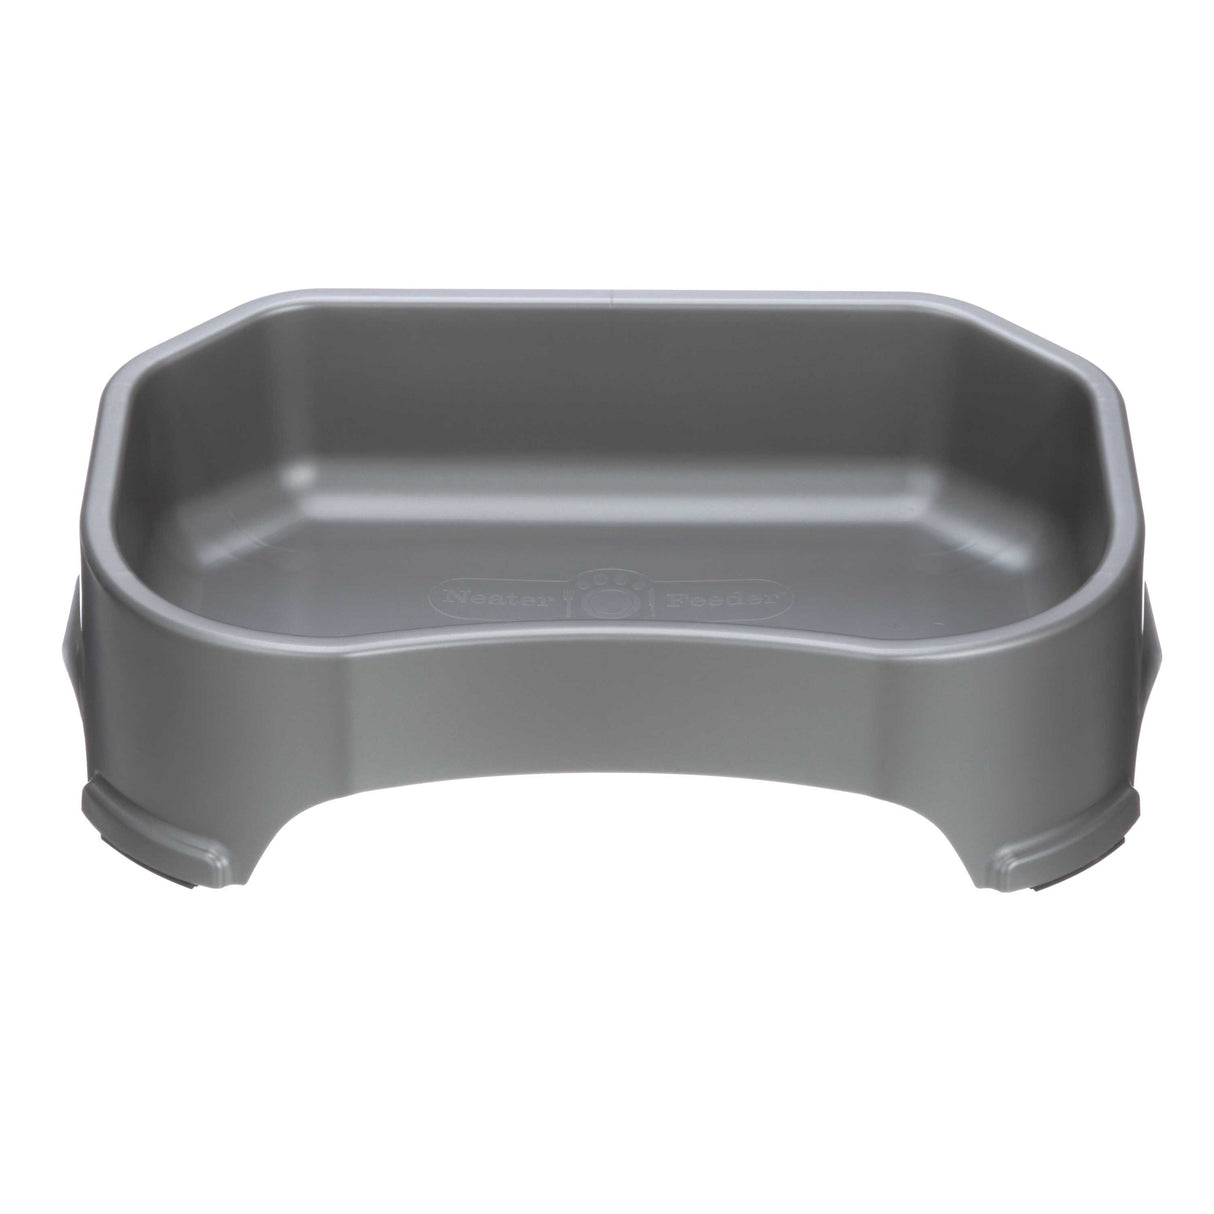 Neater Pet Brands Big Bowl Extra Large Water Bowl for Dogs (1.25 Gallon Capacity, 160 oz) Huge Over Size Pet Bowl Gunmetal Grey